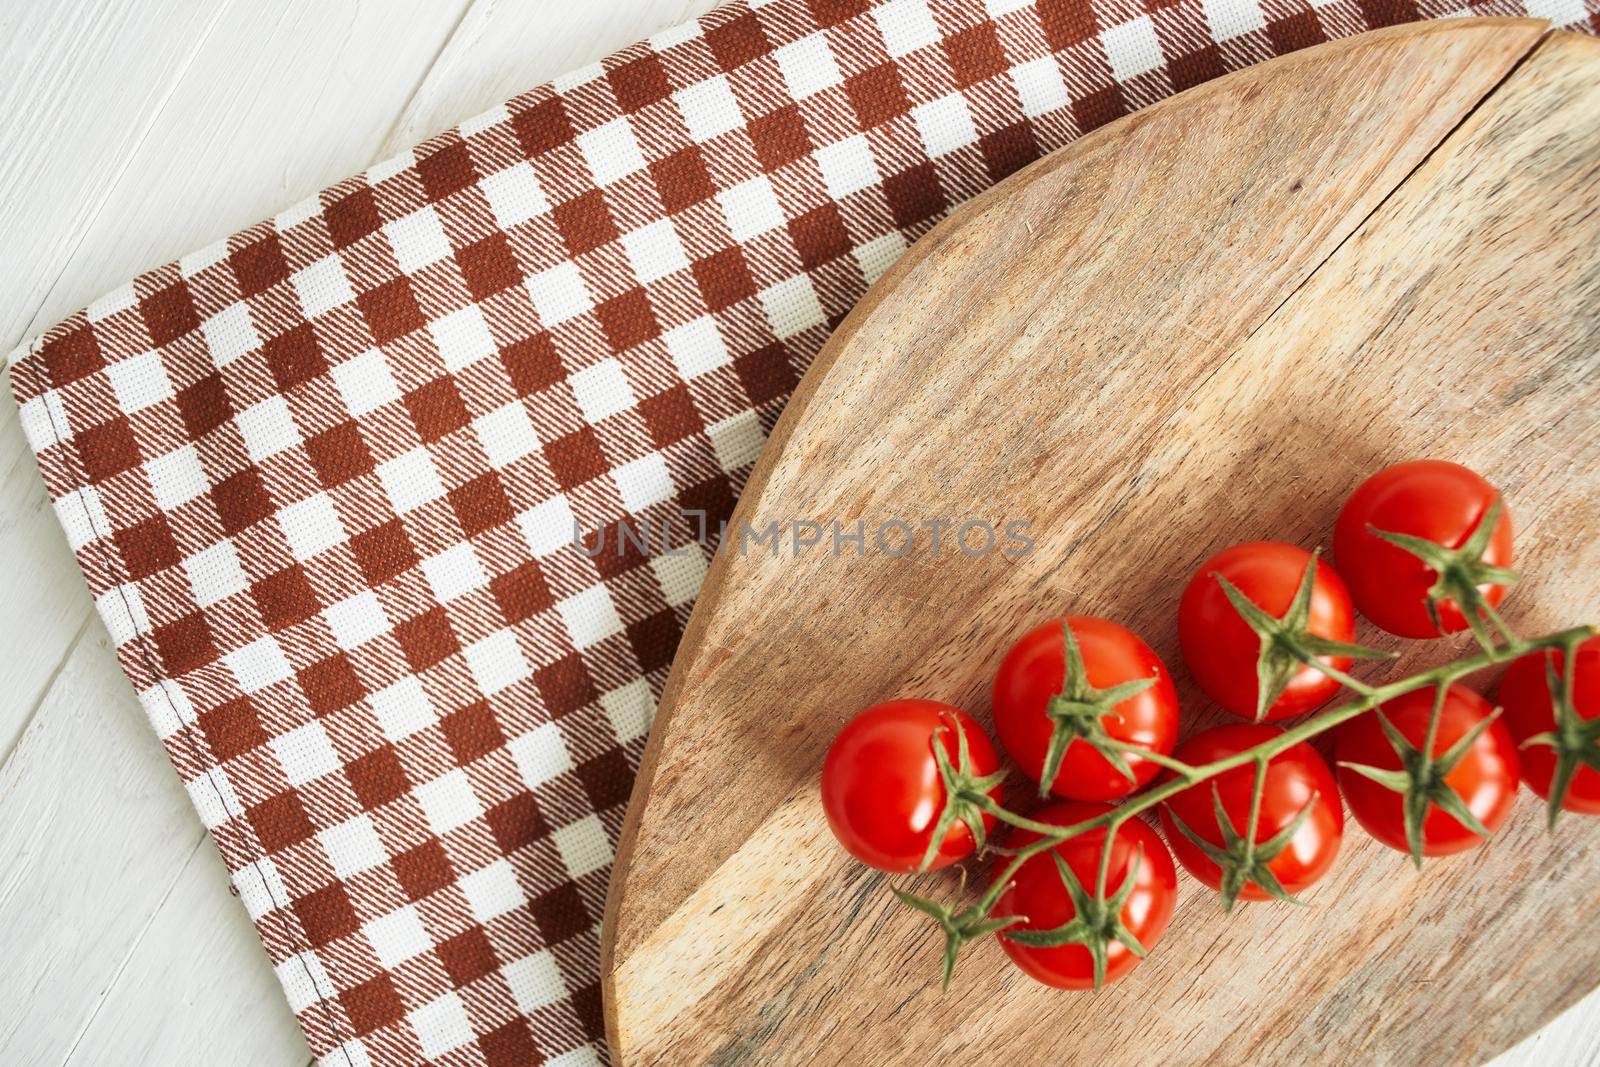 Ingredients wooden board cherry tomatoes organic wood background. High quality photo